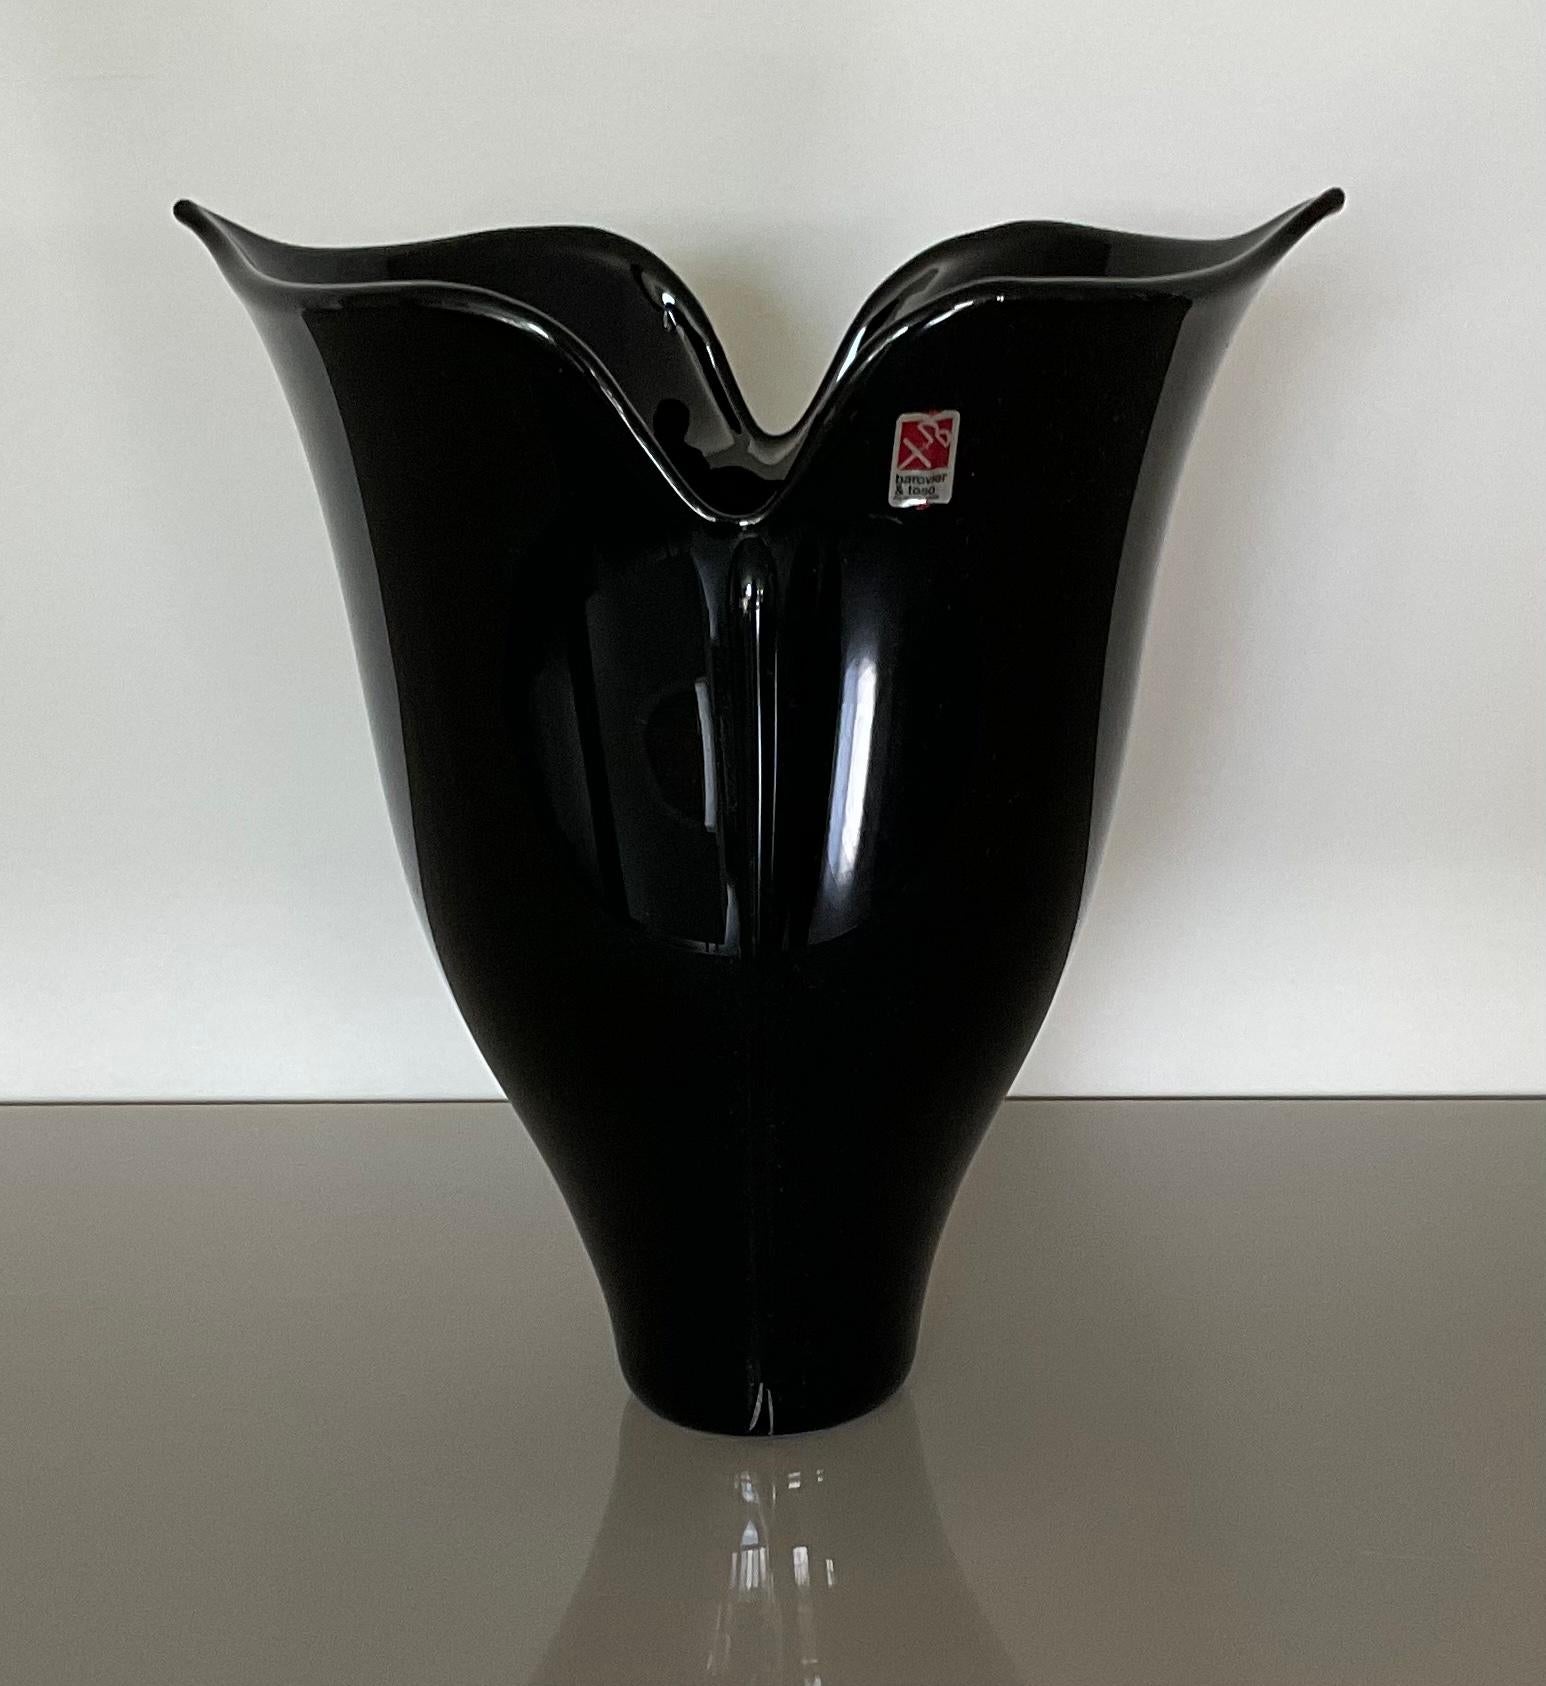 Rare Minassia Murano Vase designed for Barovier and Toso by Toni Zuccheri 1982. The vase is signed with an original label and signature. Reference Minassia series Murano Glass Museum.